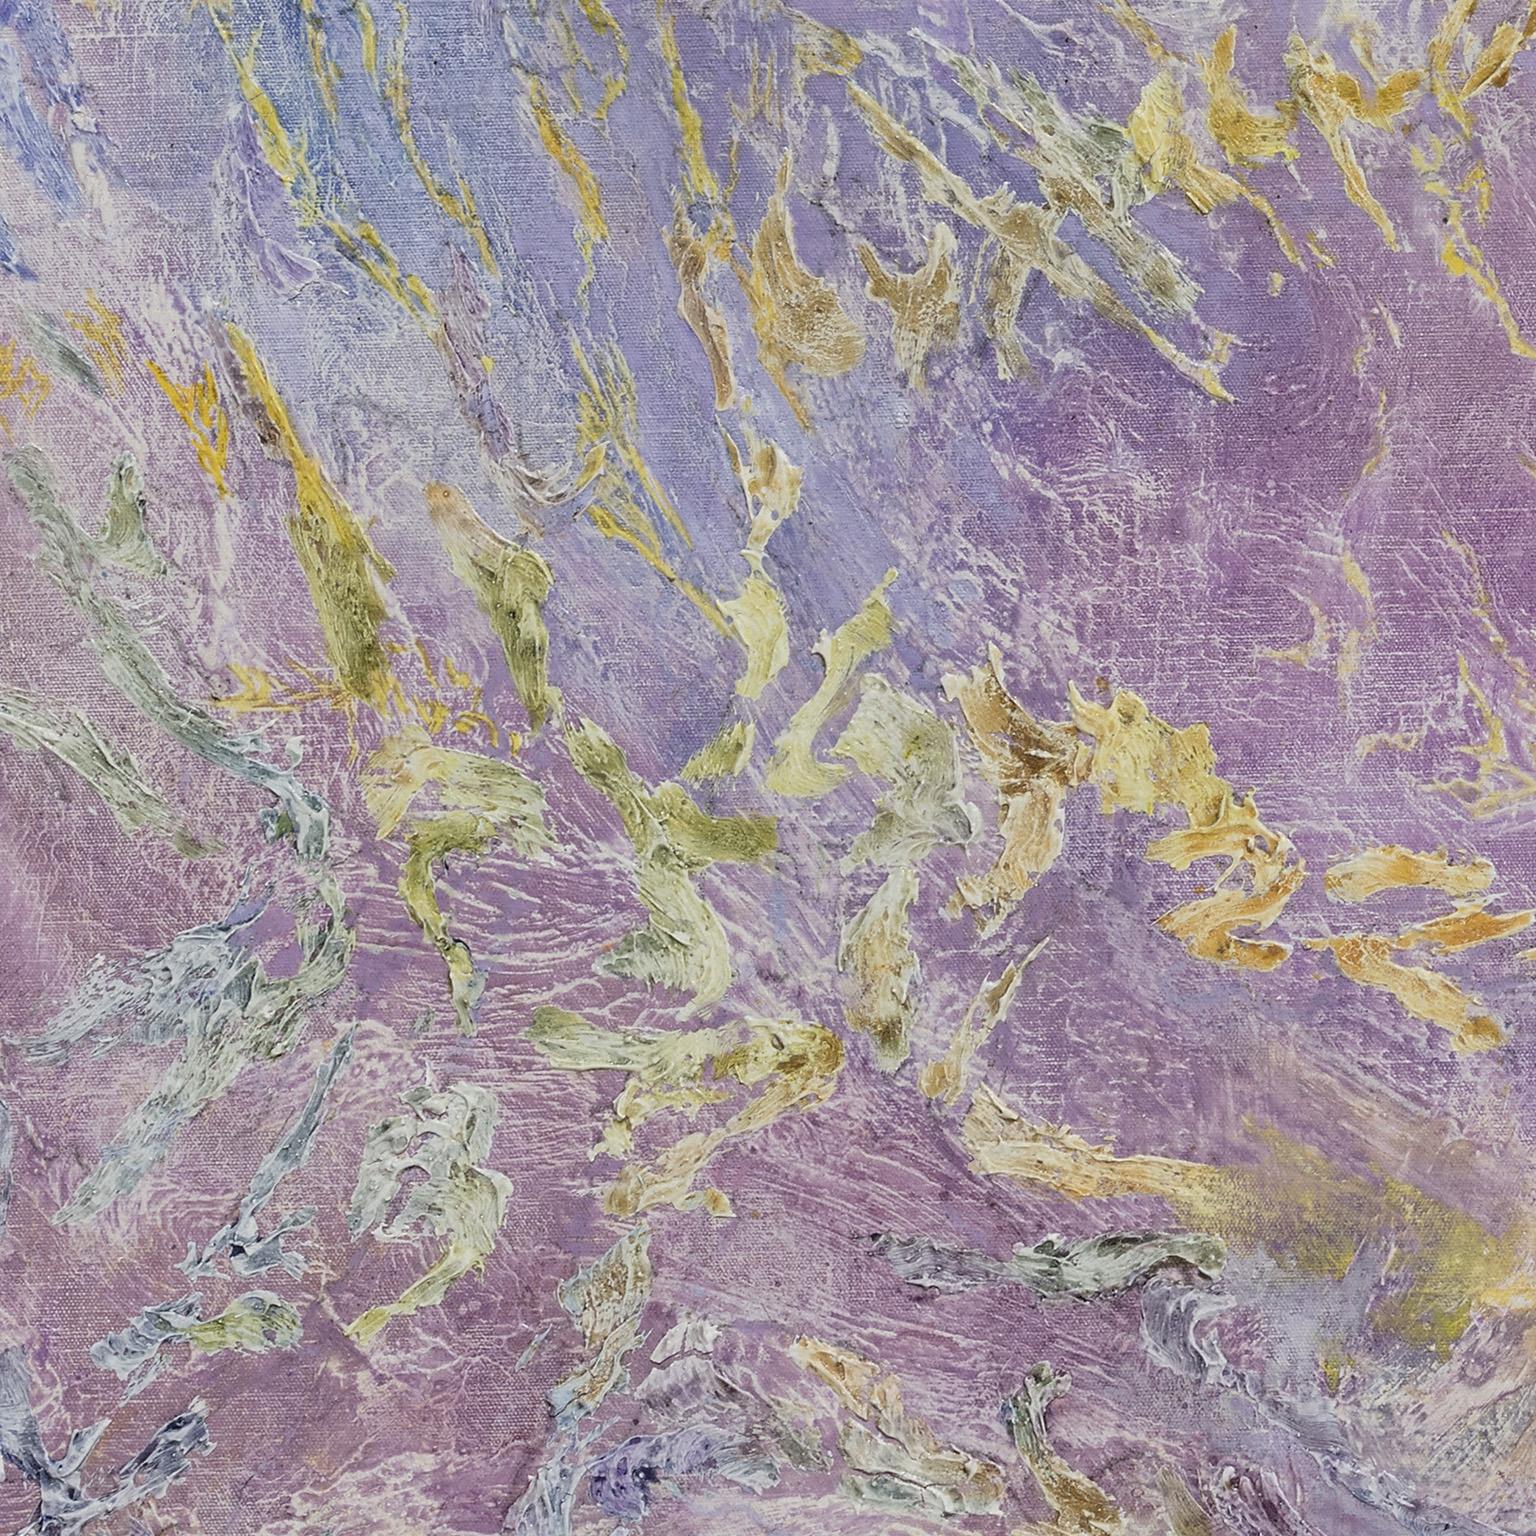 Floating in Space - Abstract Expressionist Painting, Purple, Blue, Yellow For Sale 2